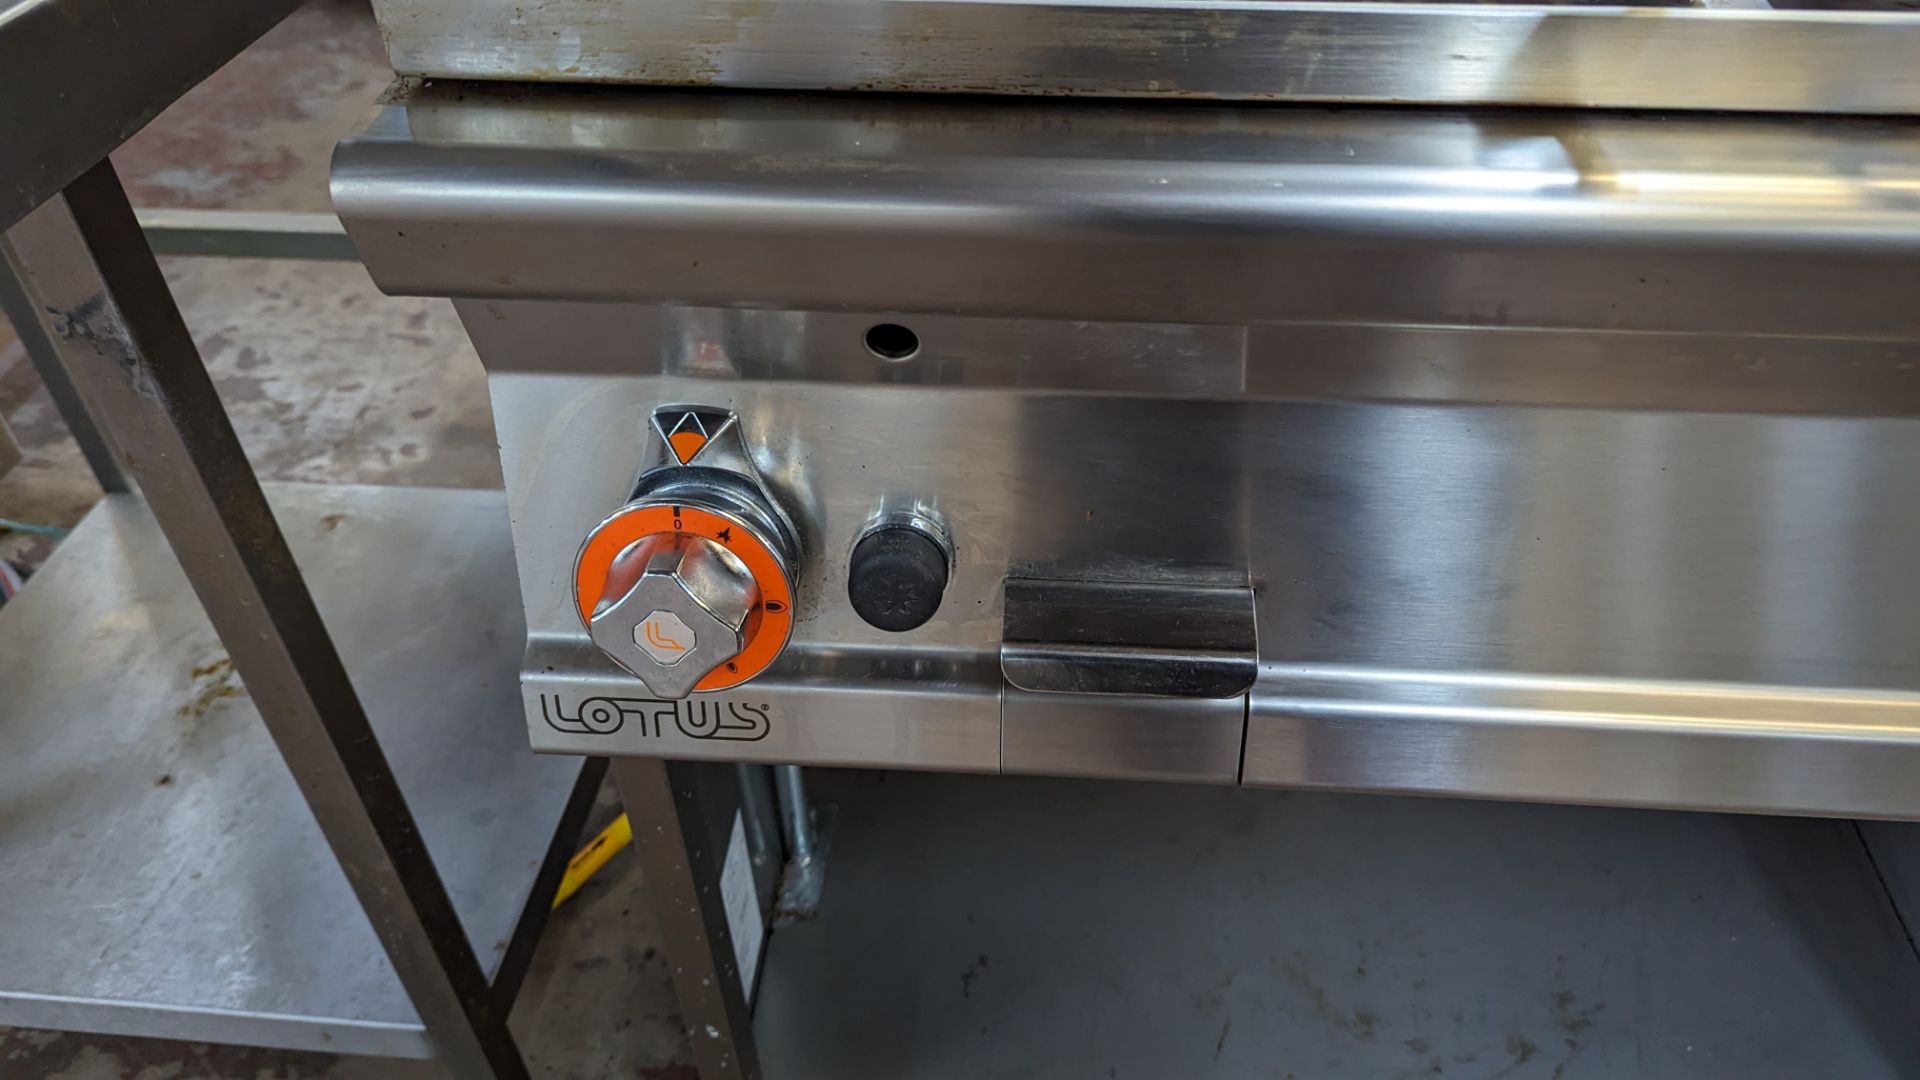 Lotus CW-78g stainless steel twin width chargrill unit on open cabinet, measuring 800mm wide x 700mm - Image 8 of 17